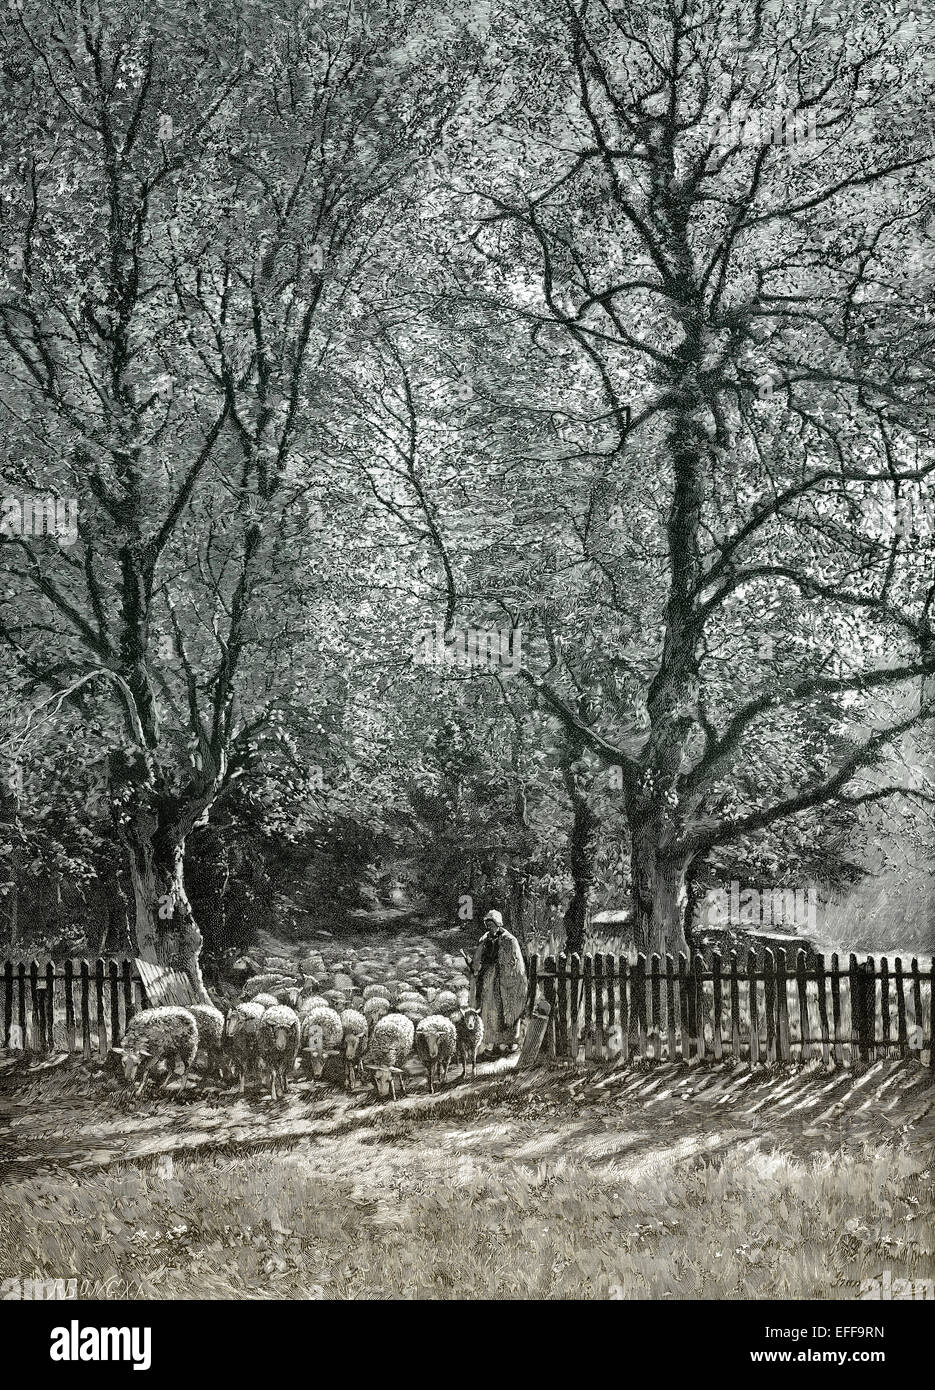 A flock of sheep passing a gate to eat grass pasture, c. 1895, after Courtens, Stock Photo